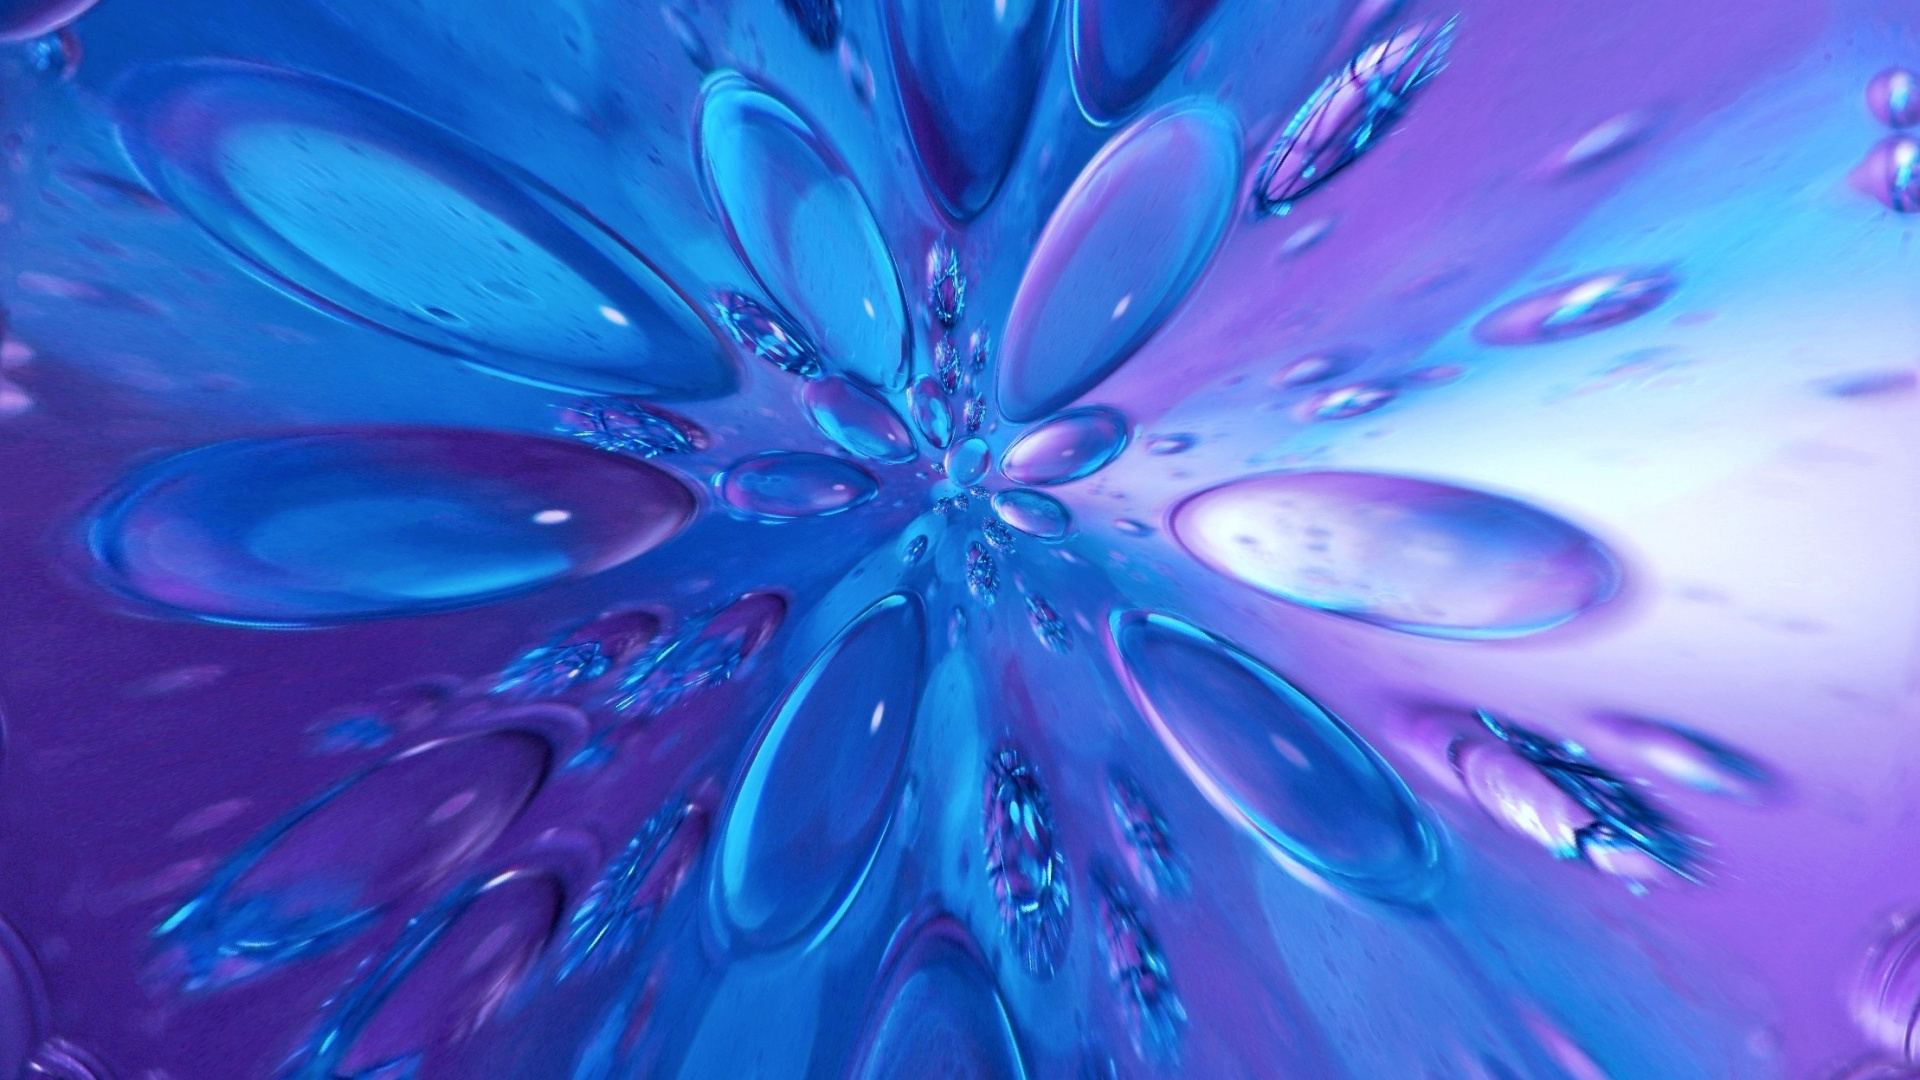 Water Droplets on Blue Glass. Wallpaper in 1920x1080 Resolution